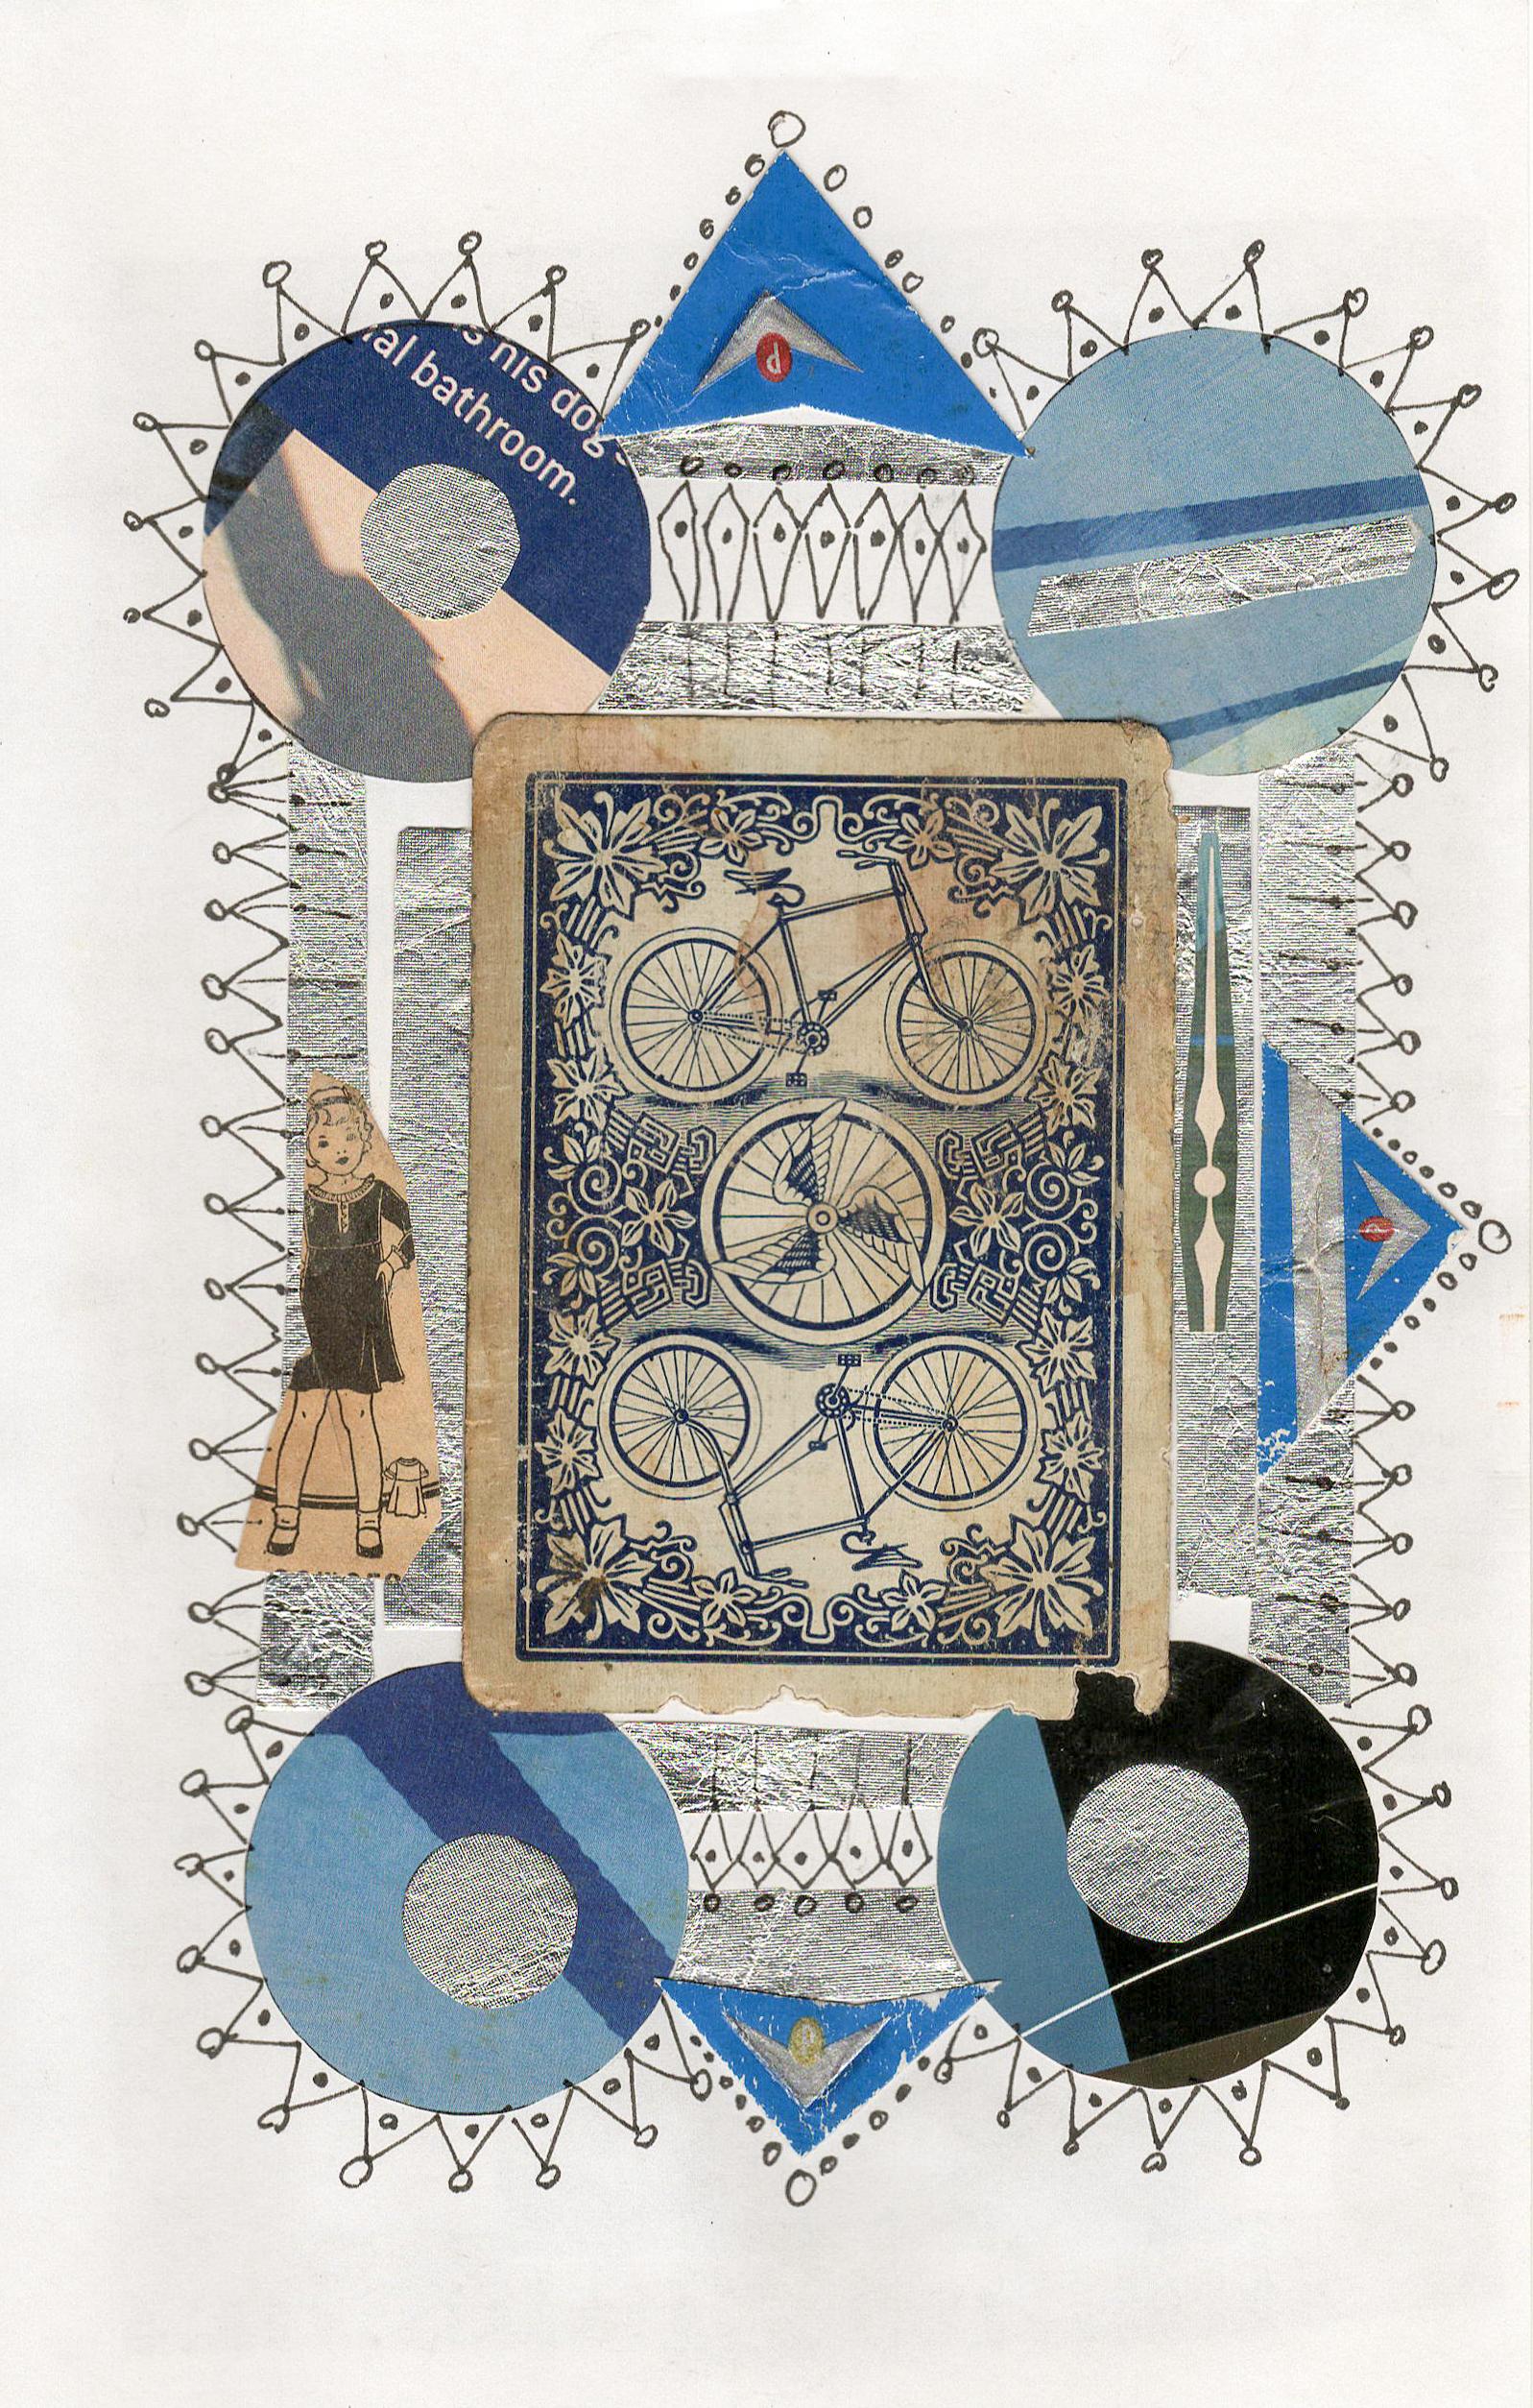 Jim Rose Abstract Painting - Collage No. 51, Drawing and Collage with Vintage Bicycle Card, Ephemera, Framed